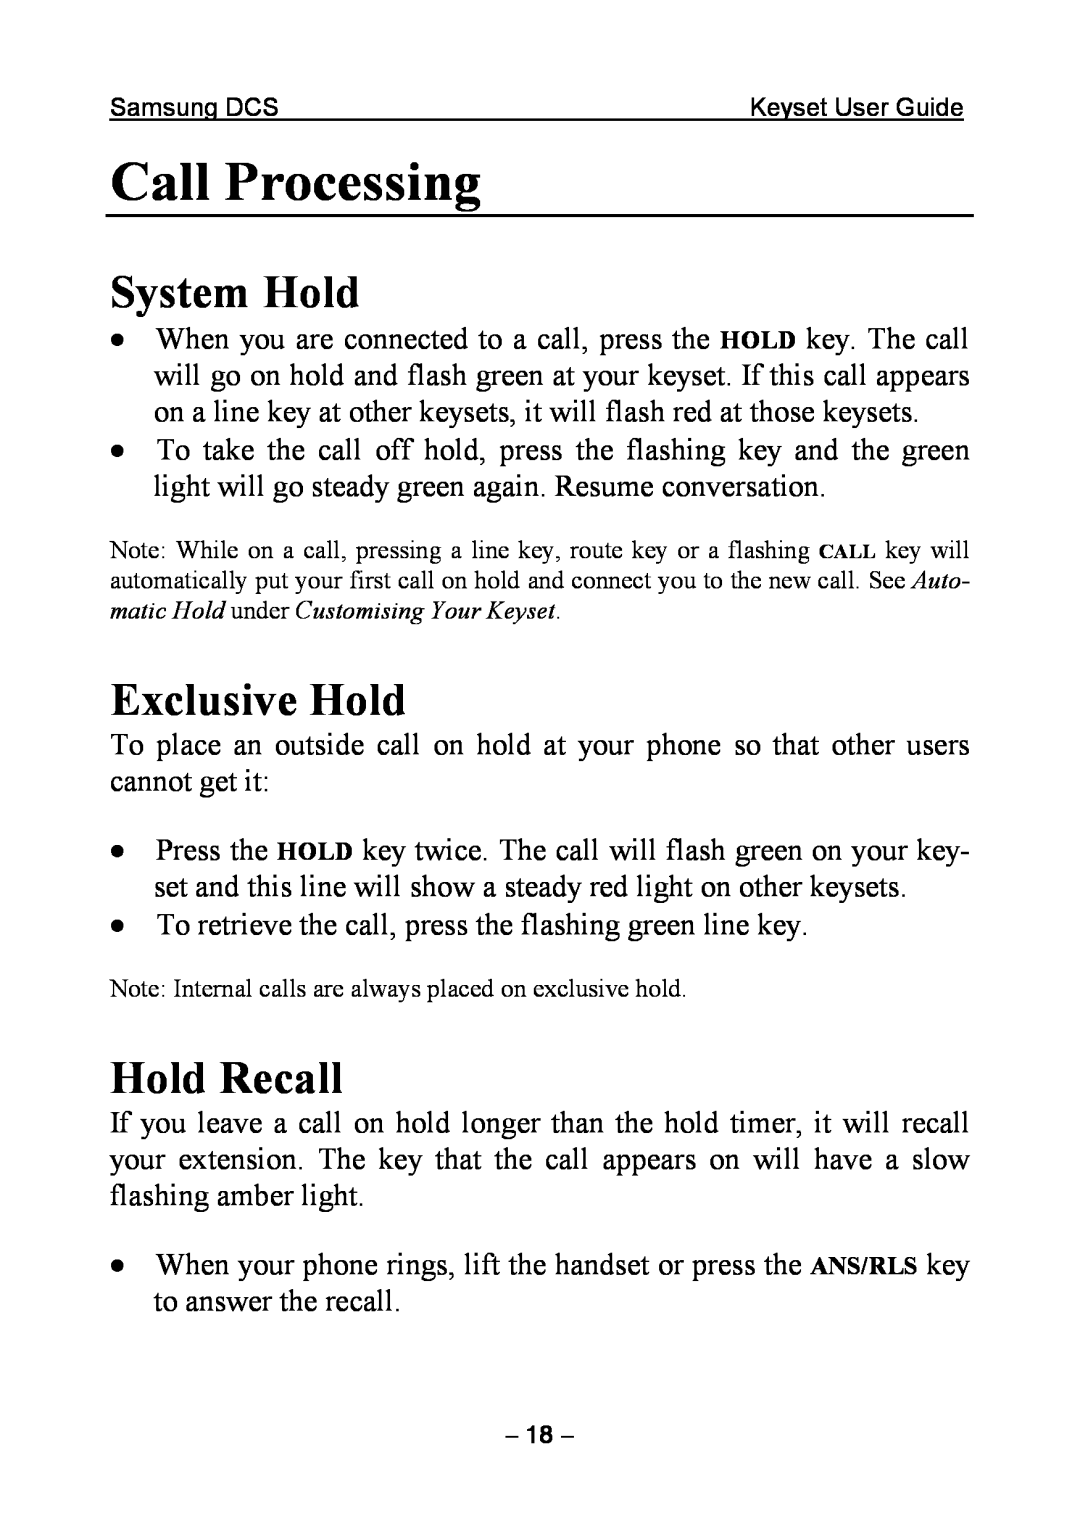 Samsung DCS KEYSET manual Call Processing, System Hold, Exclusive Hold, Hold Recall 